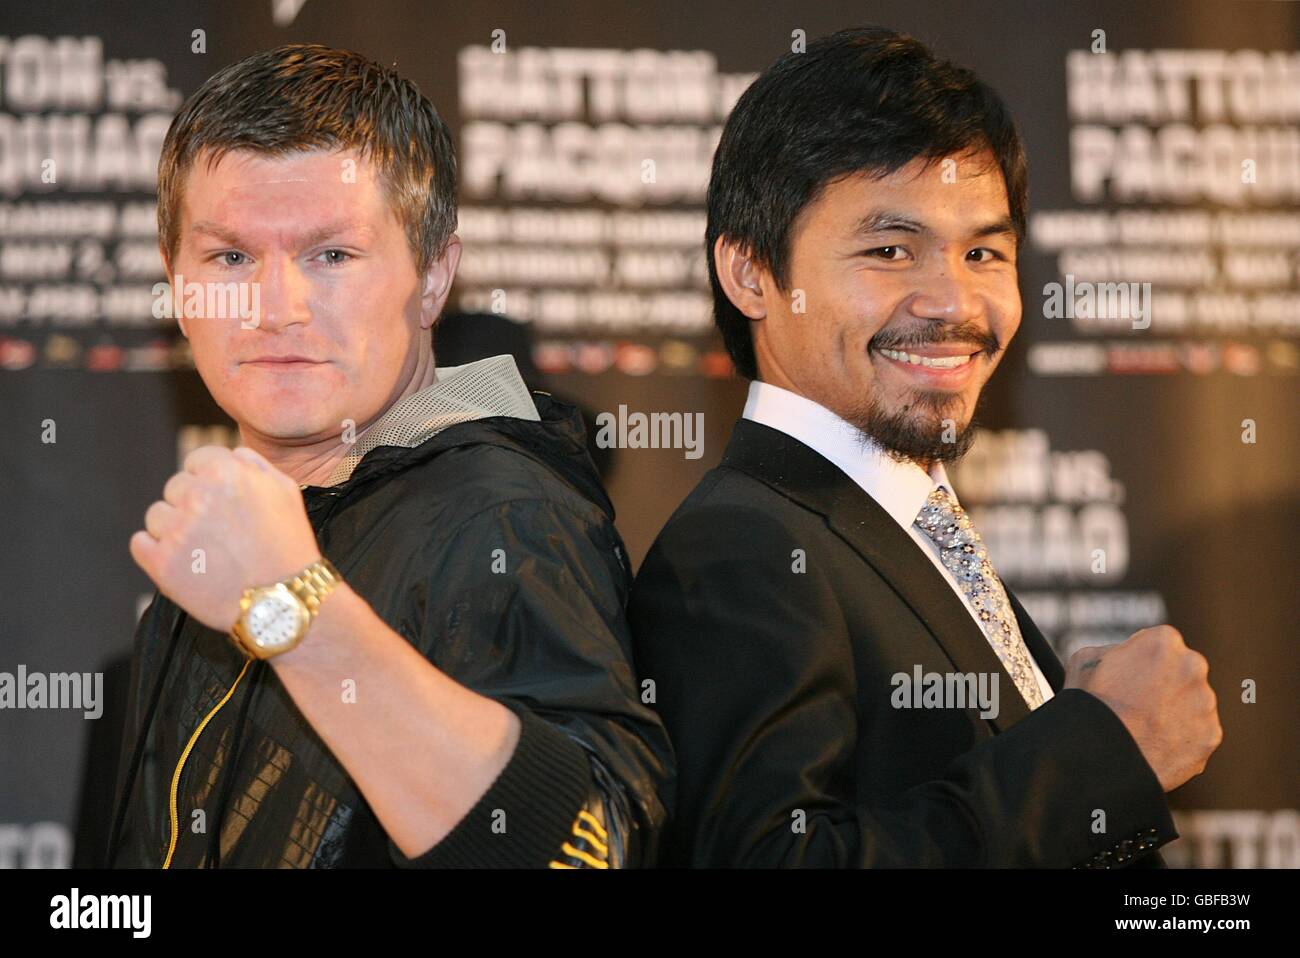 Boxing - Ricky Hatton v Manny Pacquiao Press Event - Manchester Stock Photo